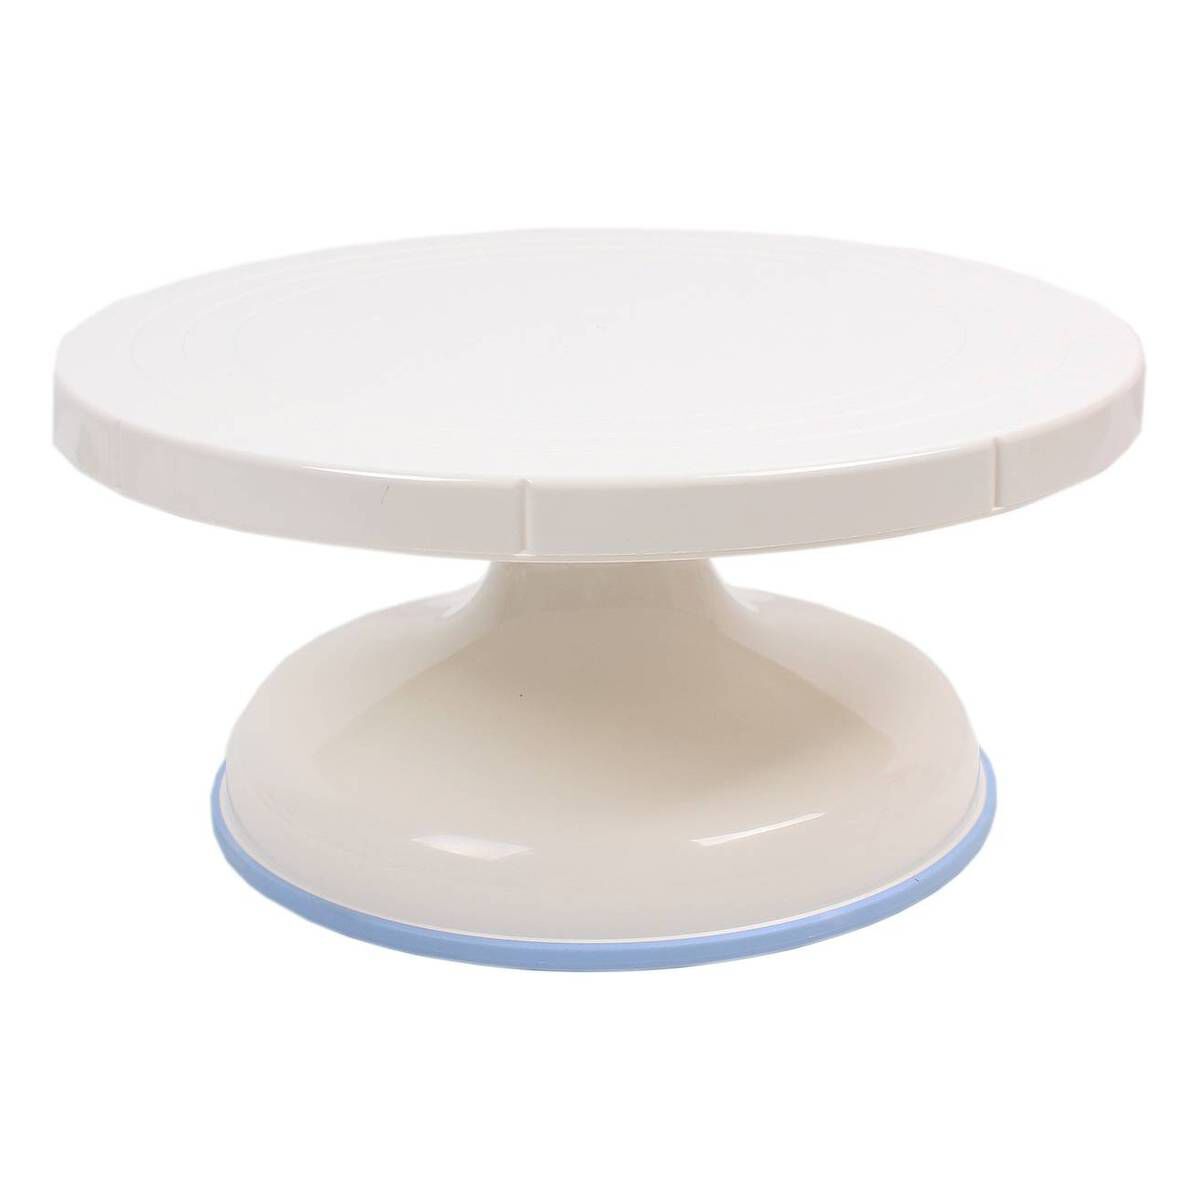 Aluminum alloy cake stand Baking tool 8 10 12 inch mounted cream cake table  Turntable Rotating table stand base turn Decorating - AliExpress